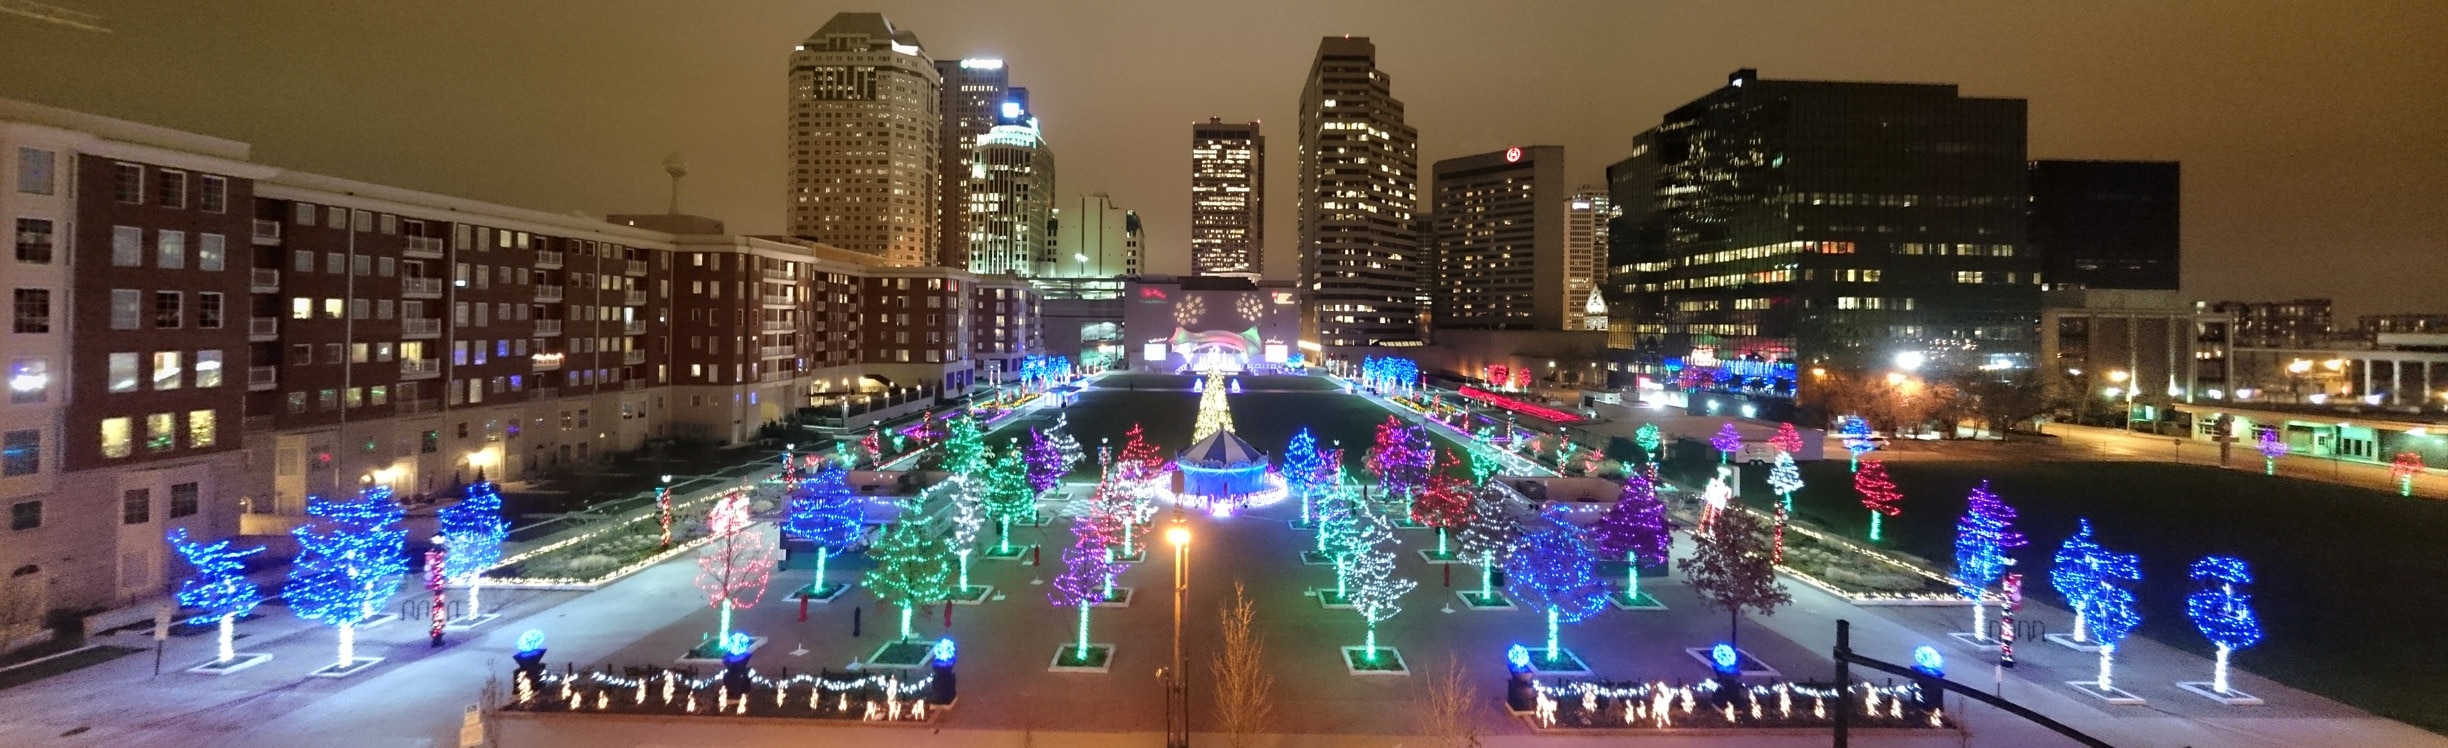 The #CCHolidayLights @ColumbusCommons

Over 300,000 LED lights decorate the downtown park!